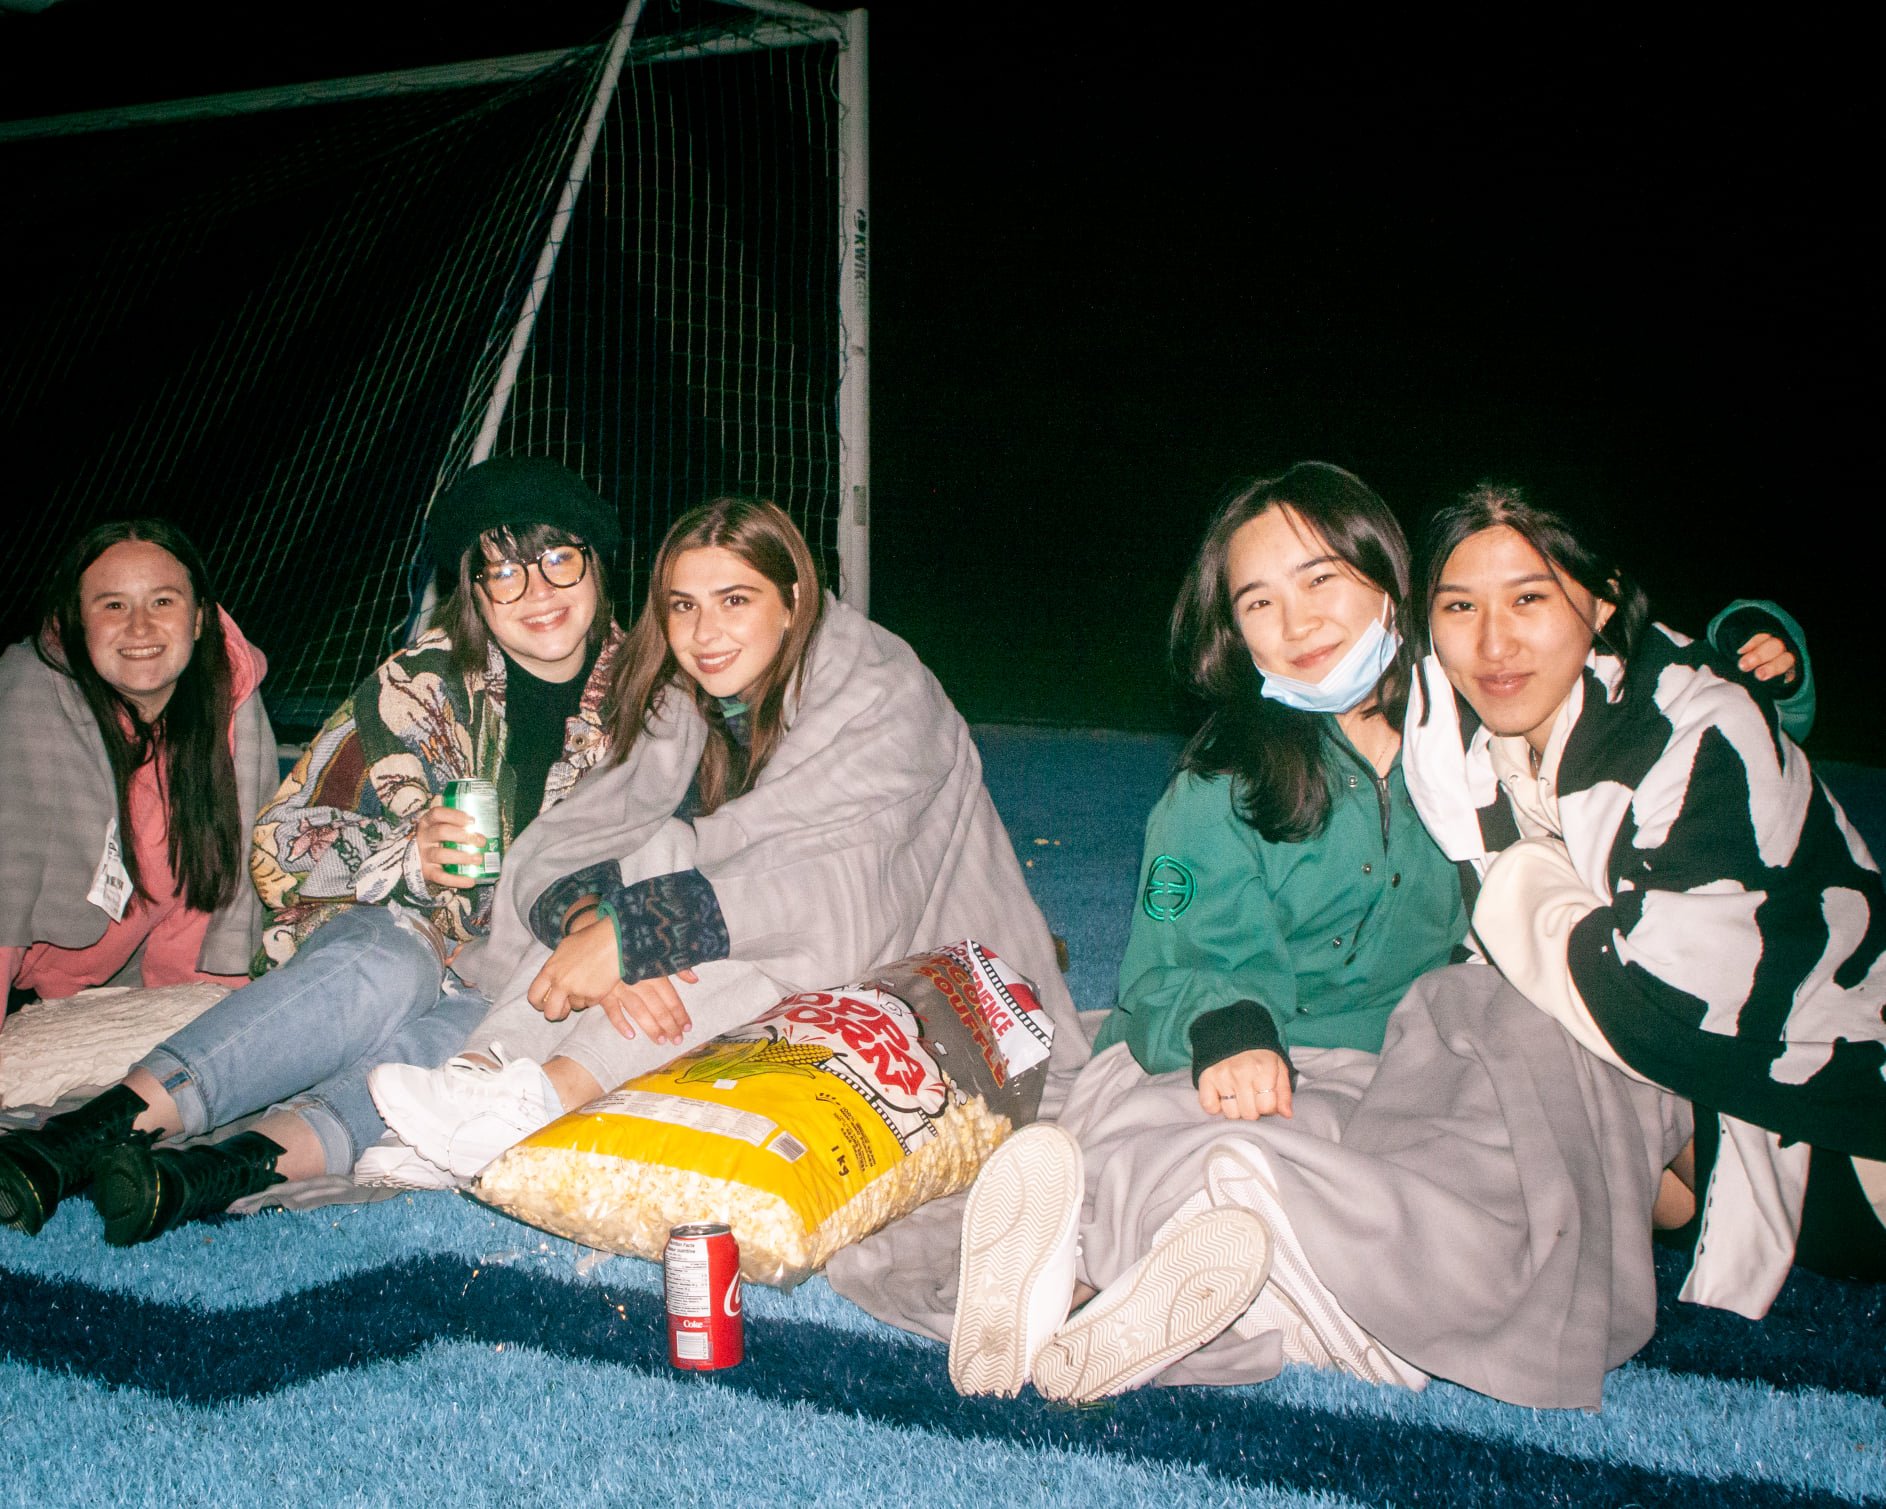  A  group of five students sitting on the grass smiling at night. A large popcorn bag in the middle.  